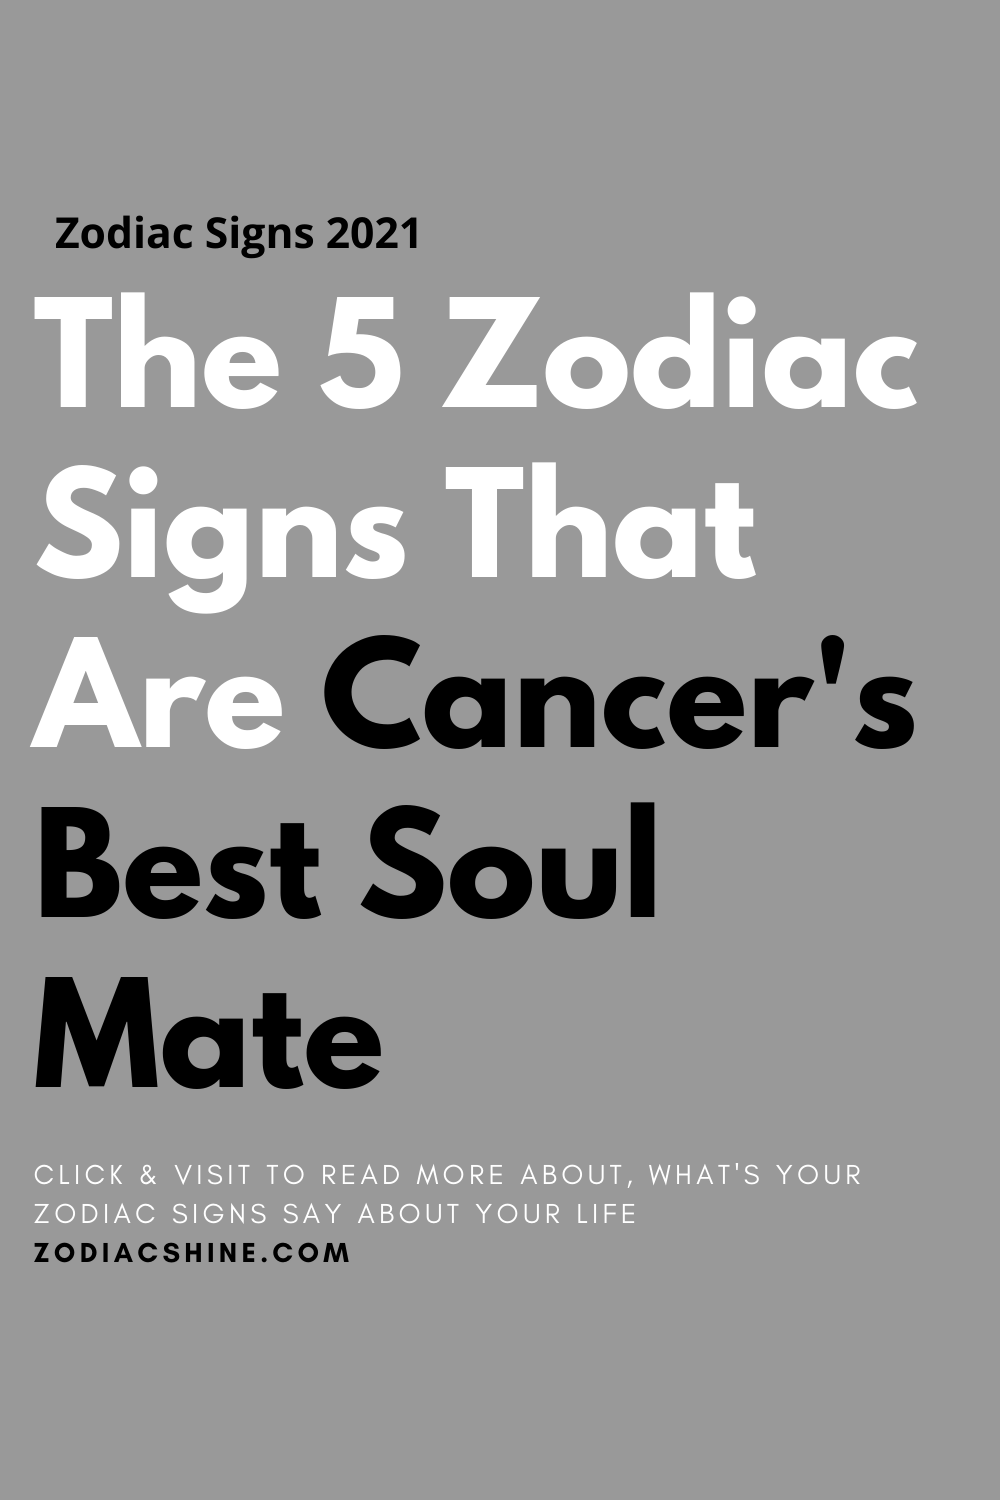 The 5 Zodiac Signs That Are Cancer's Best Soul Mate